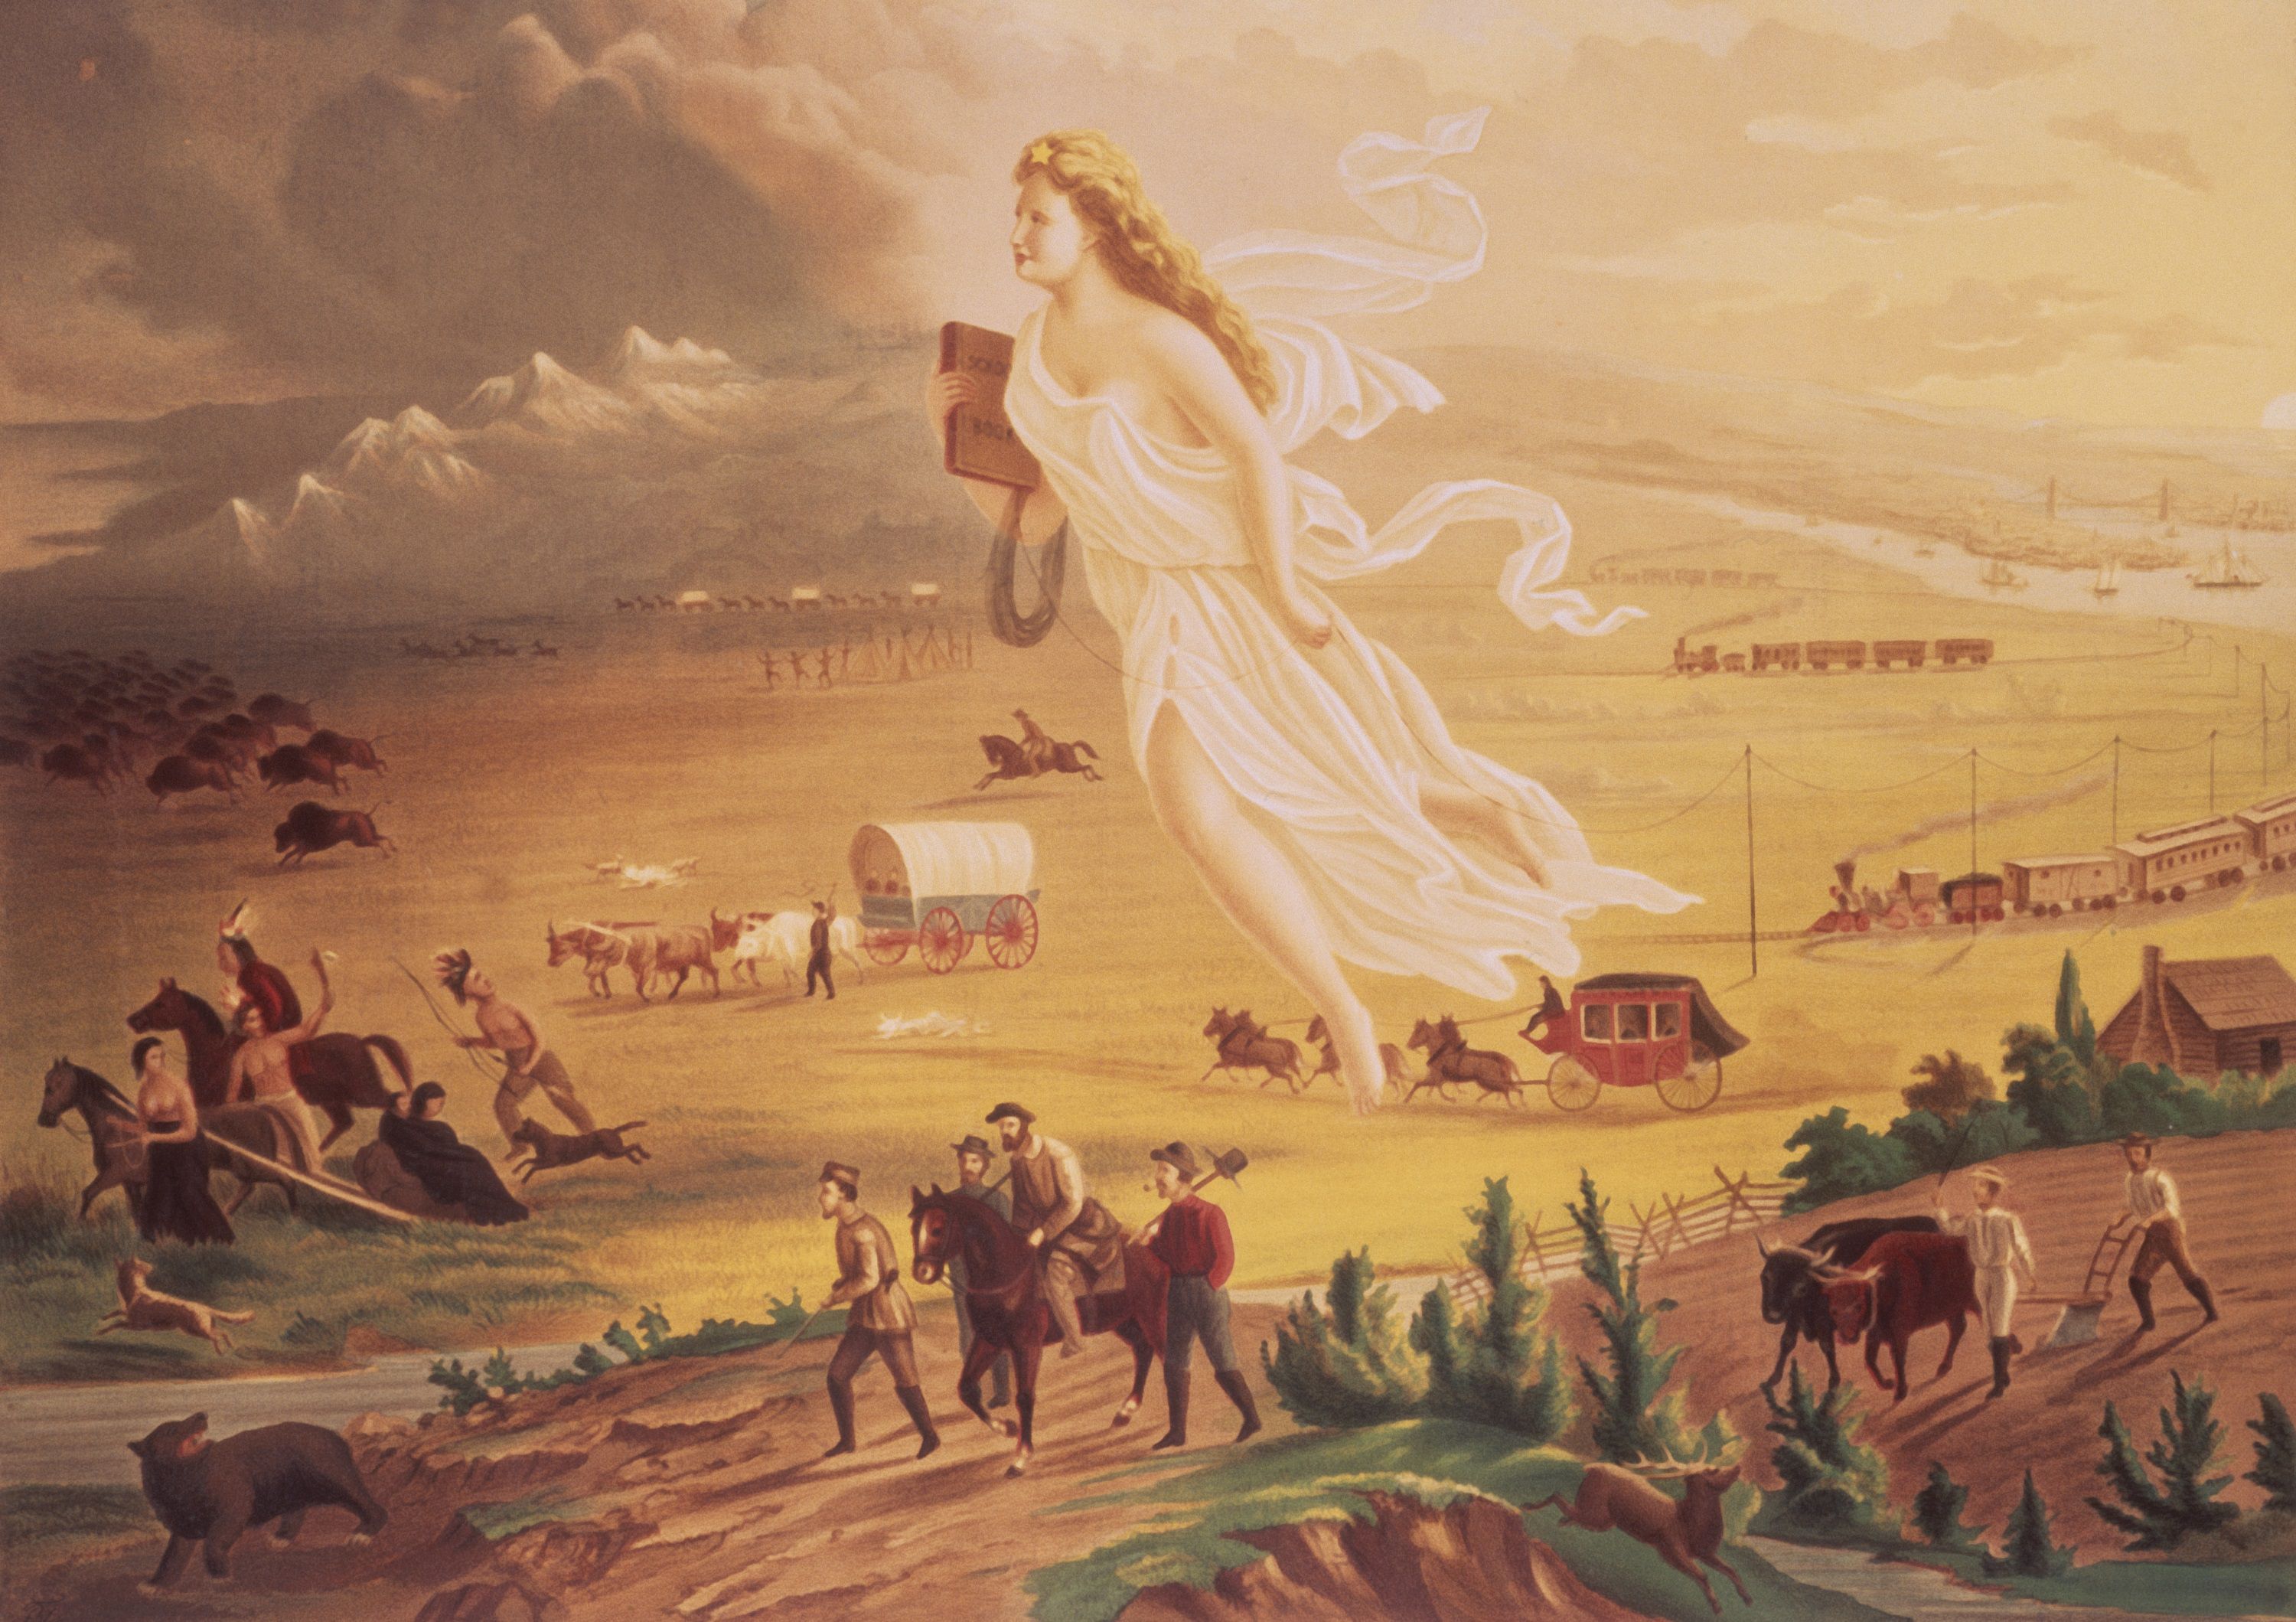 manifest-destiny-s-meaning-to-american-expansion